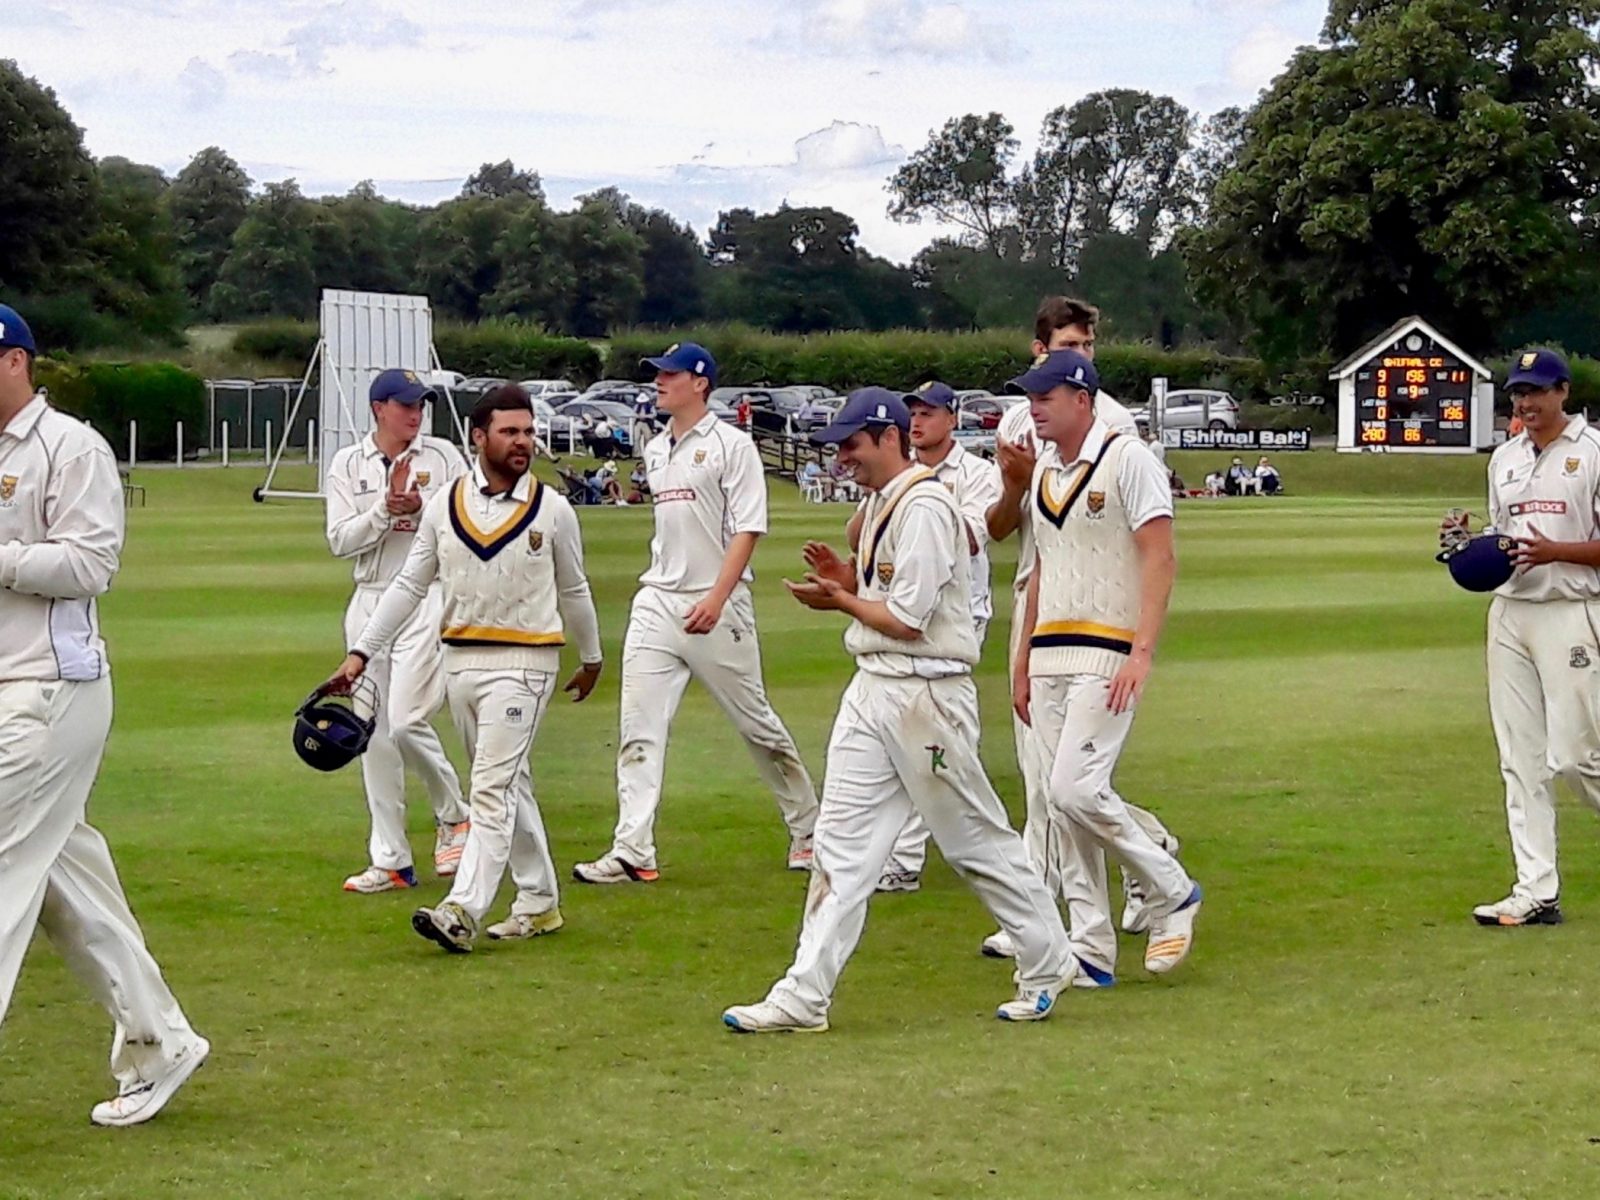 Steve-Leach-leads-Shropshire-off-after-bowling-out-Oxfordshire-for-196-at-Shifnal-2